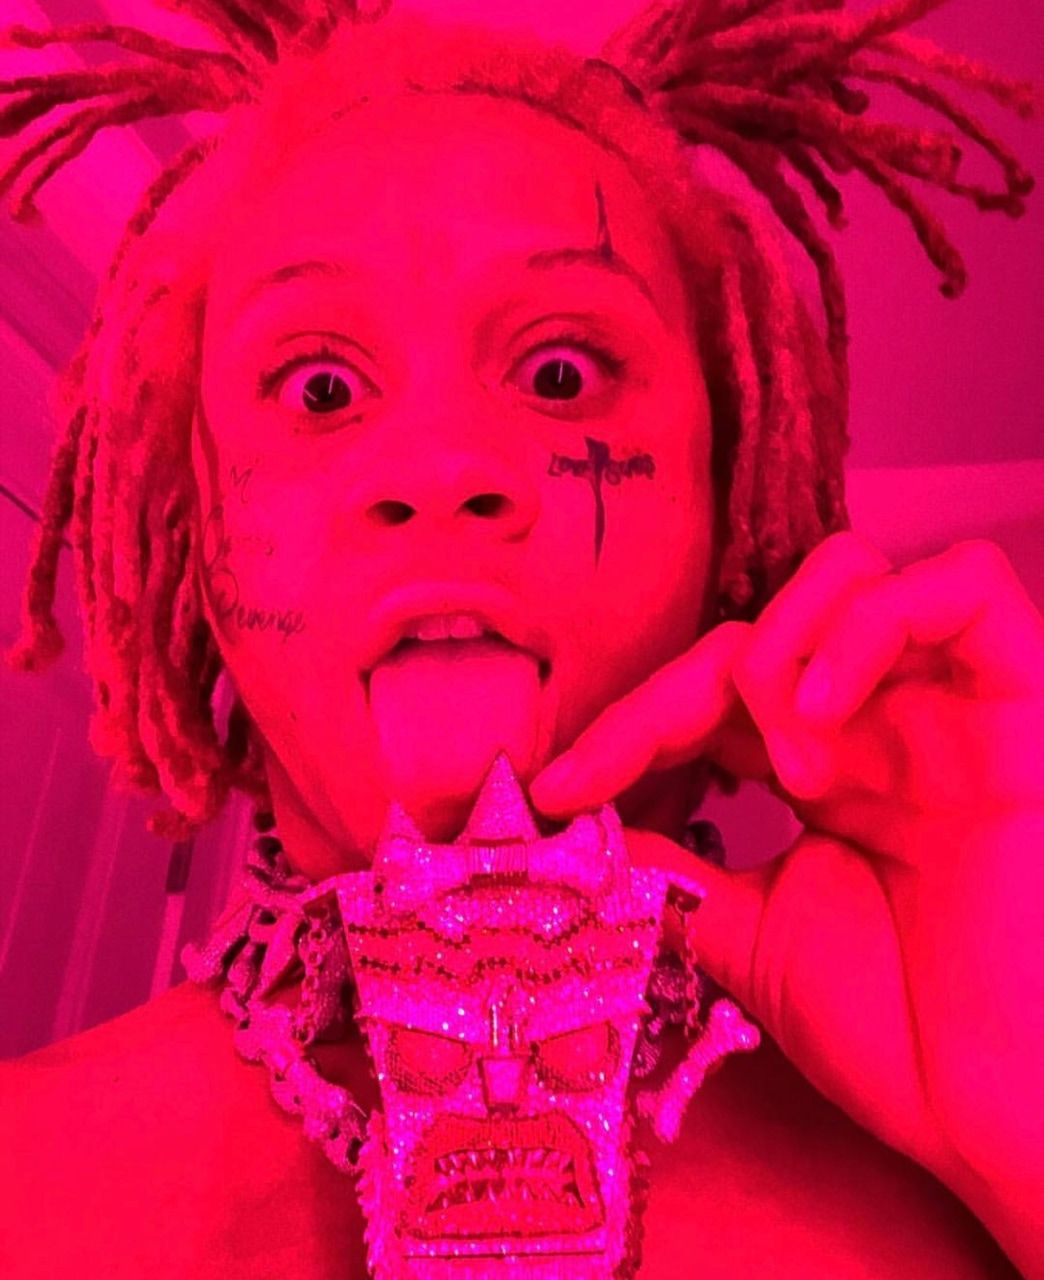 image about trippie redd. See more about